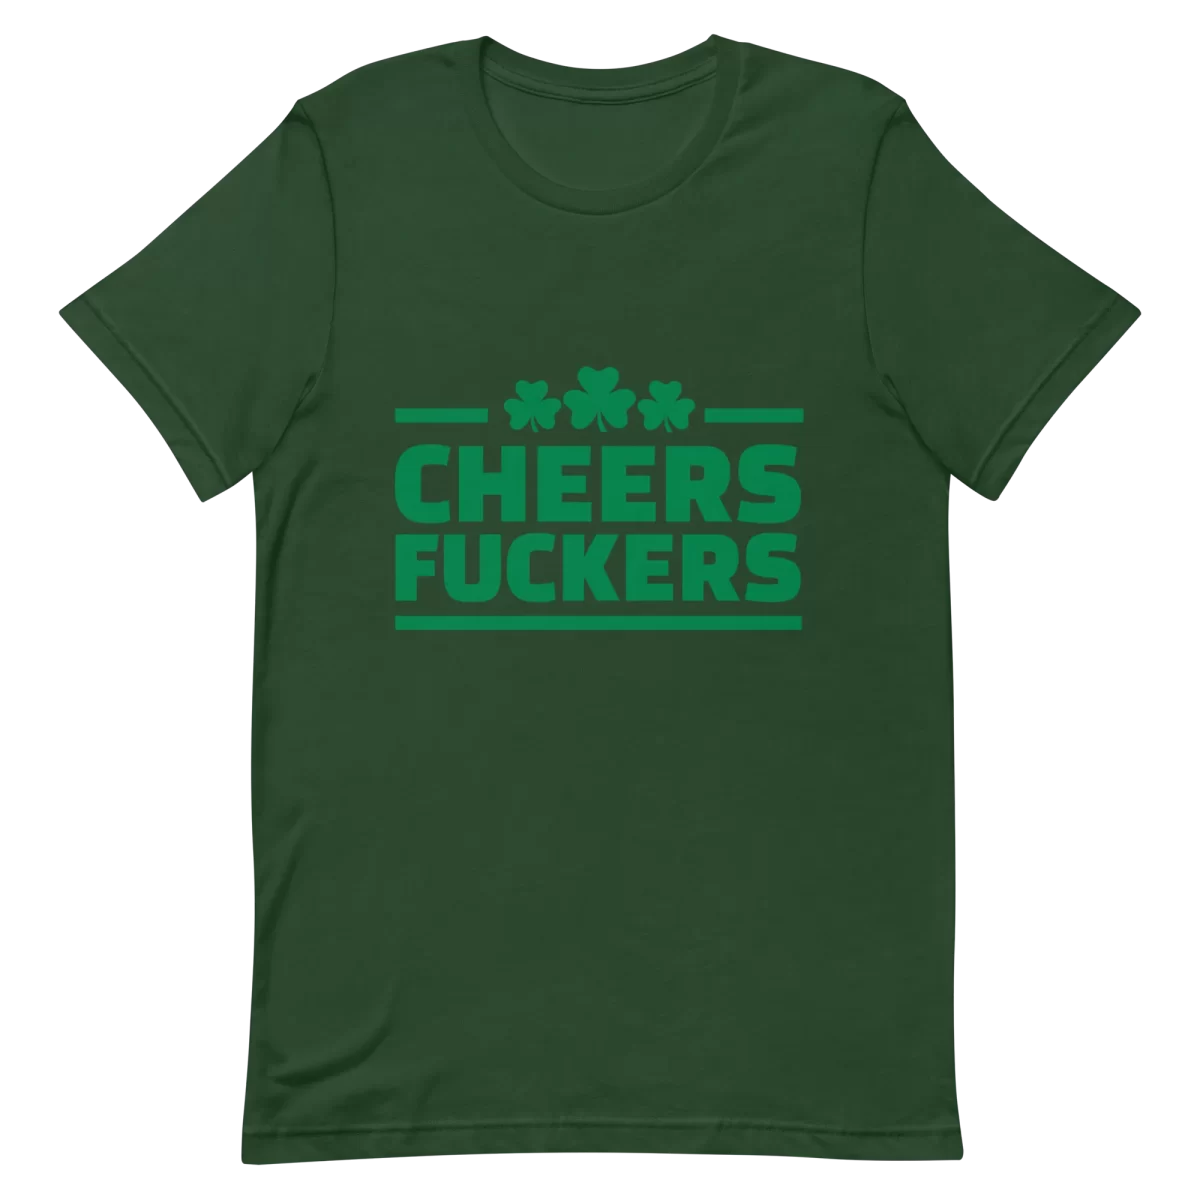 Unisex T-Shirt - Cheers Fuckers - Forest